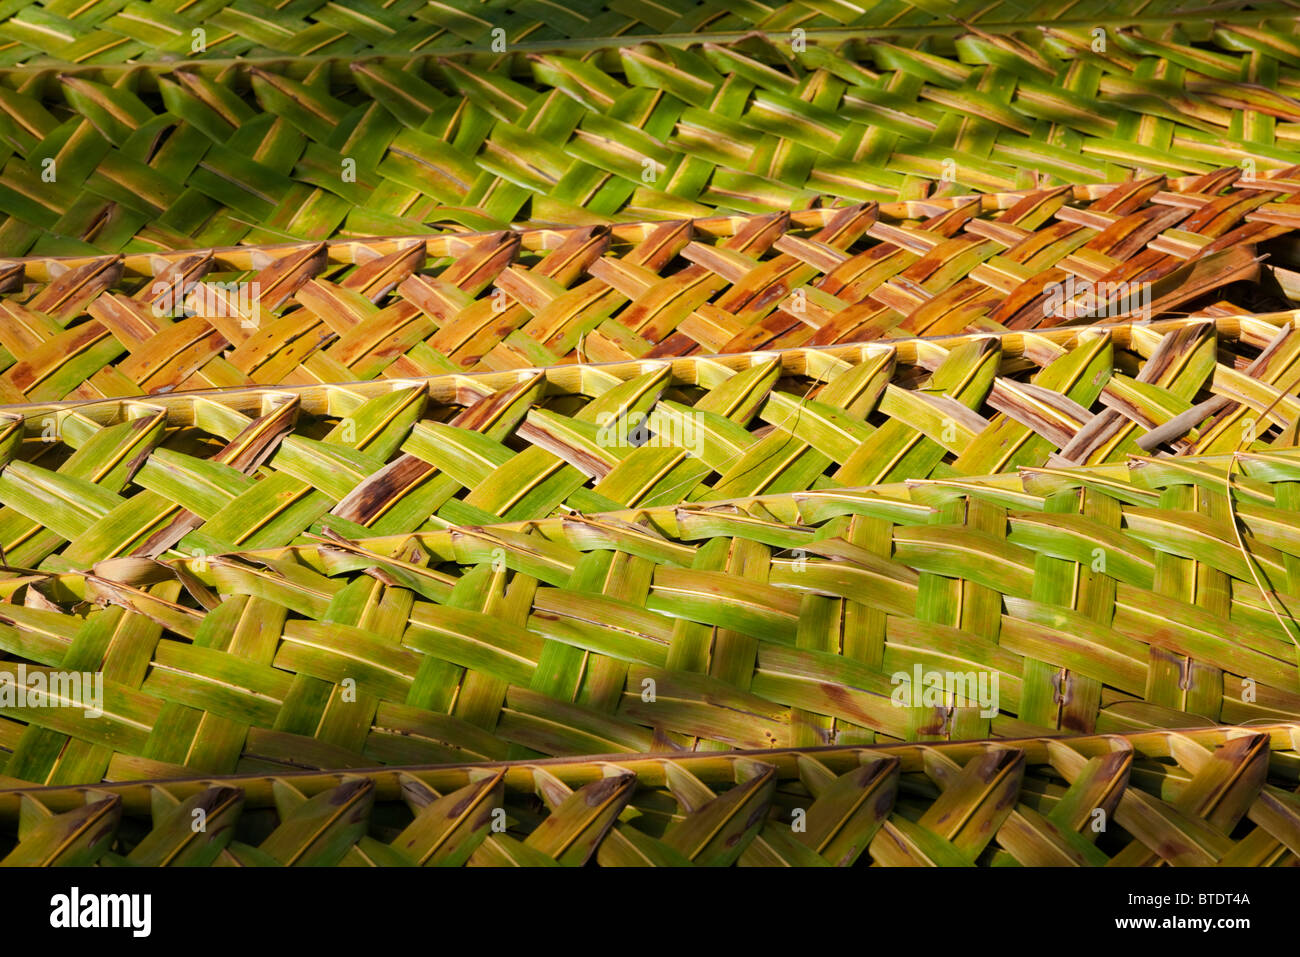 Close-up of plaited palm leaves used as roofing material Stock Photo